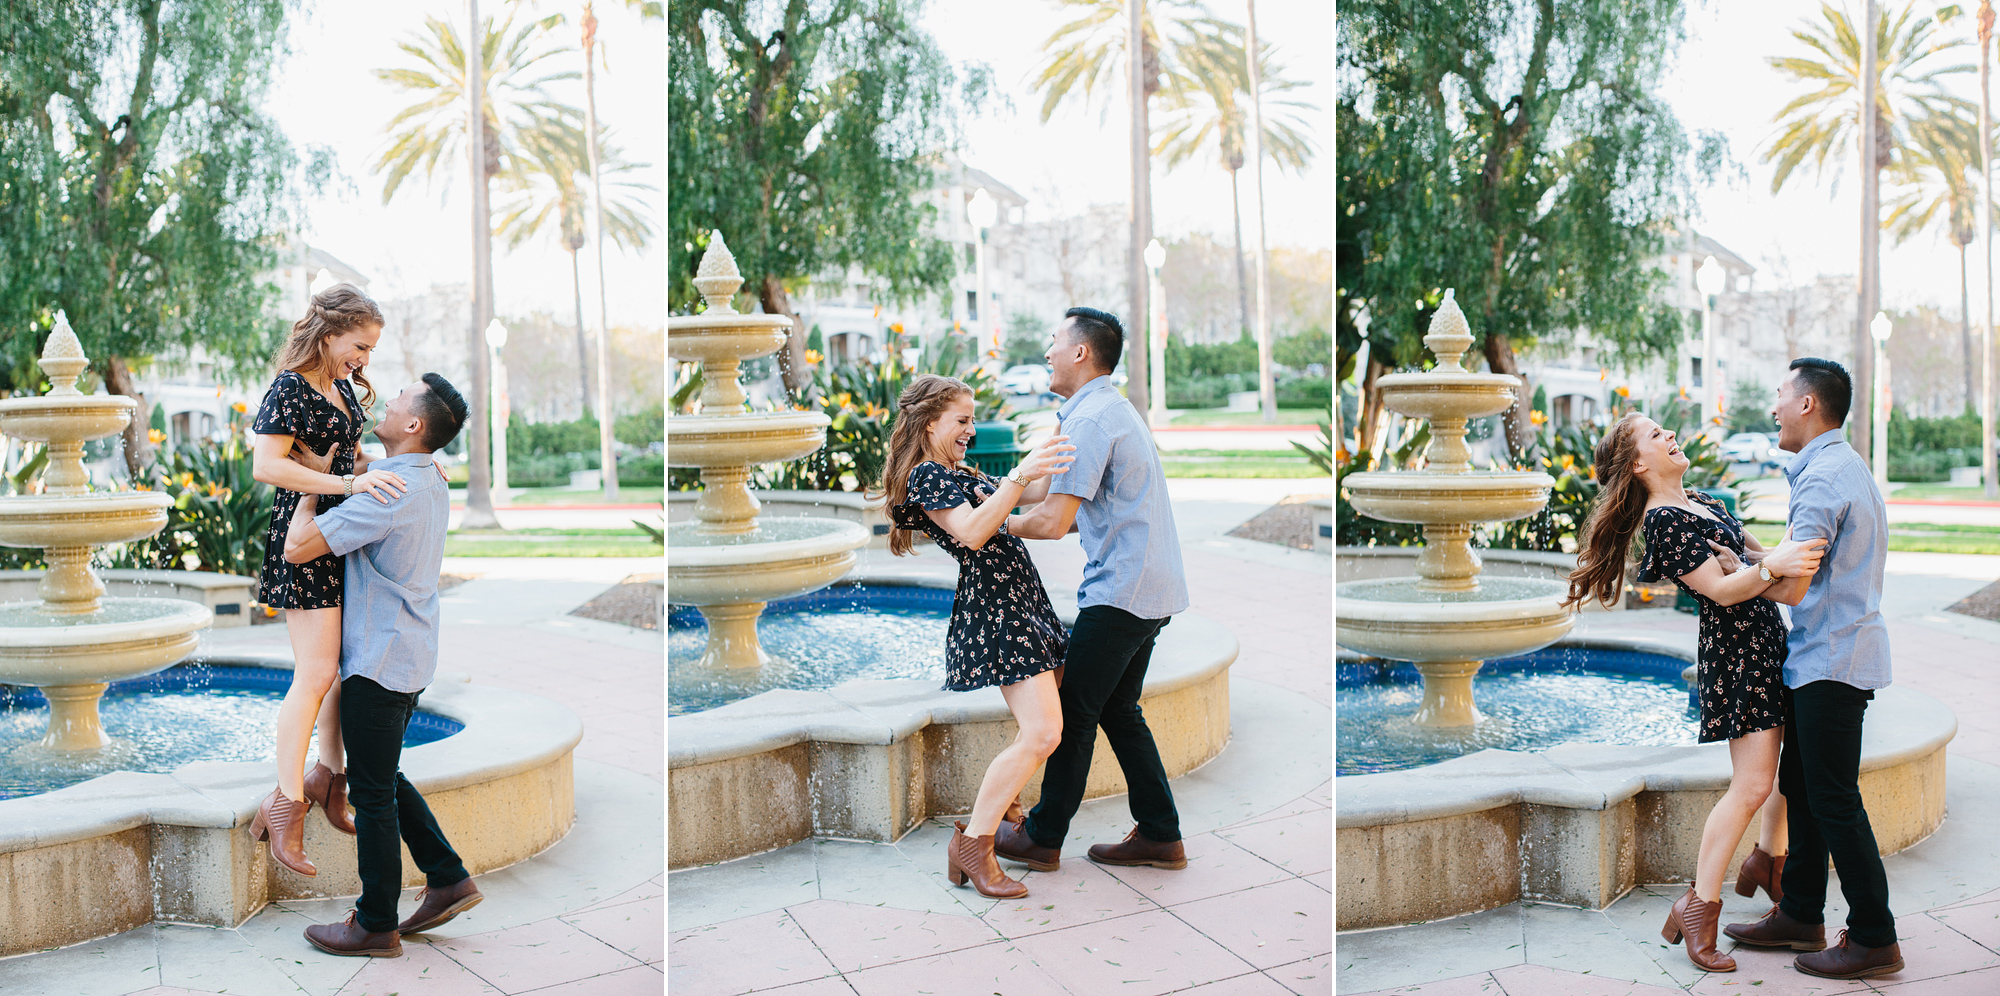 Three photos from engagement session. Sequence of woman jumping off fountain with grooms help